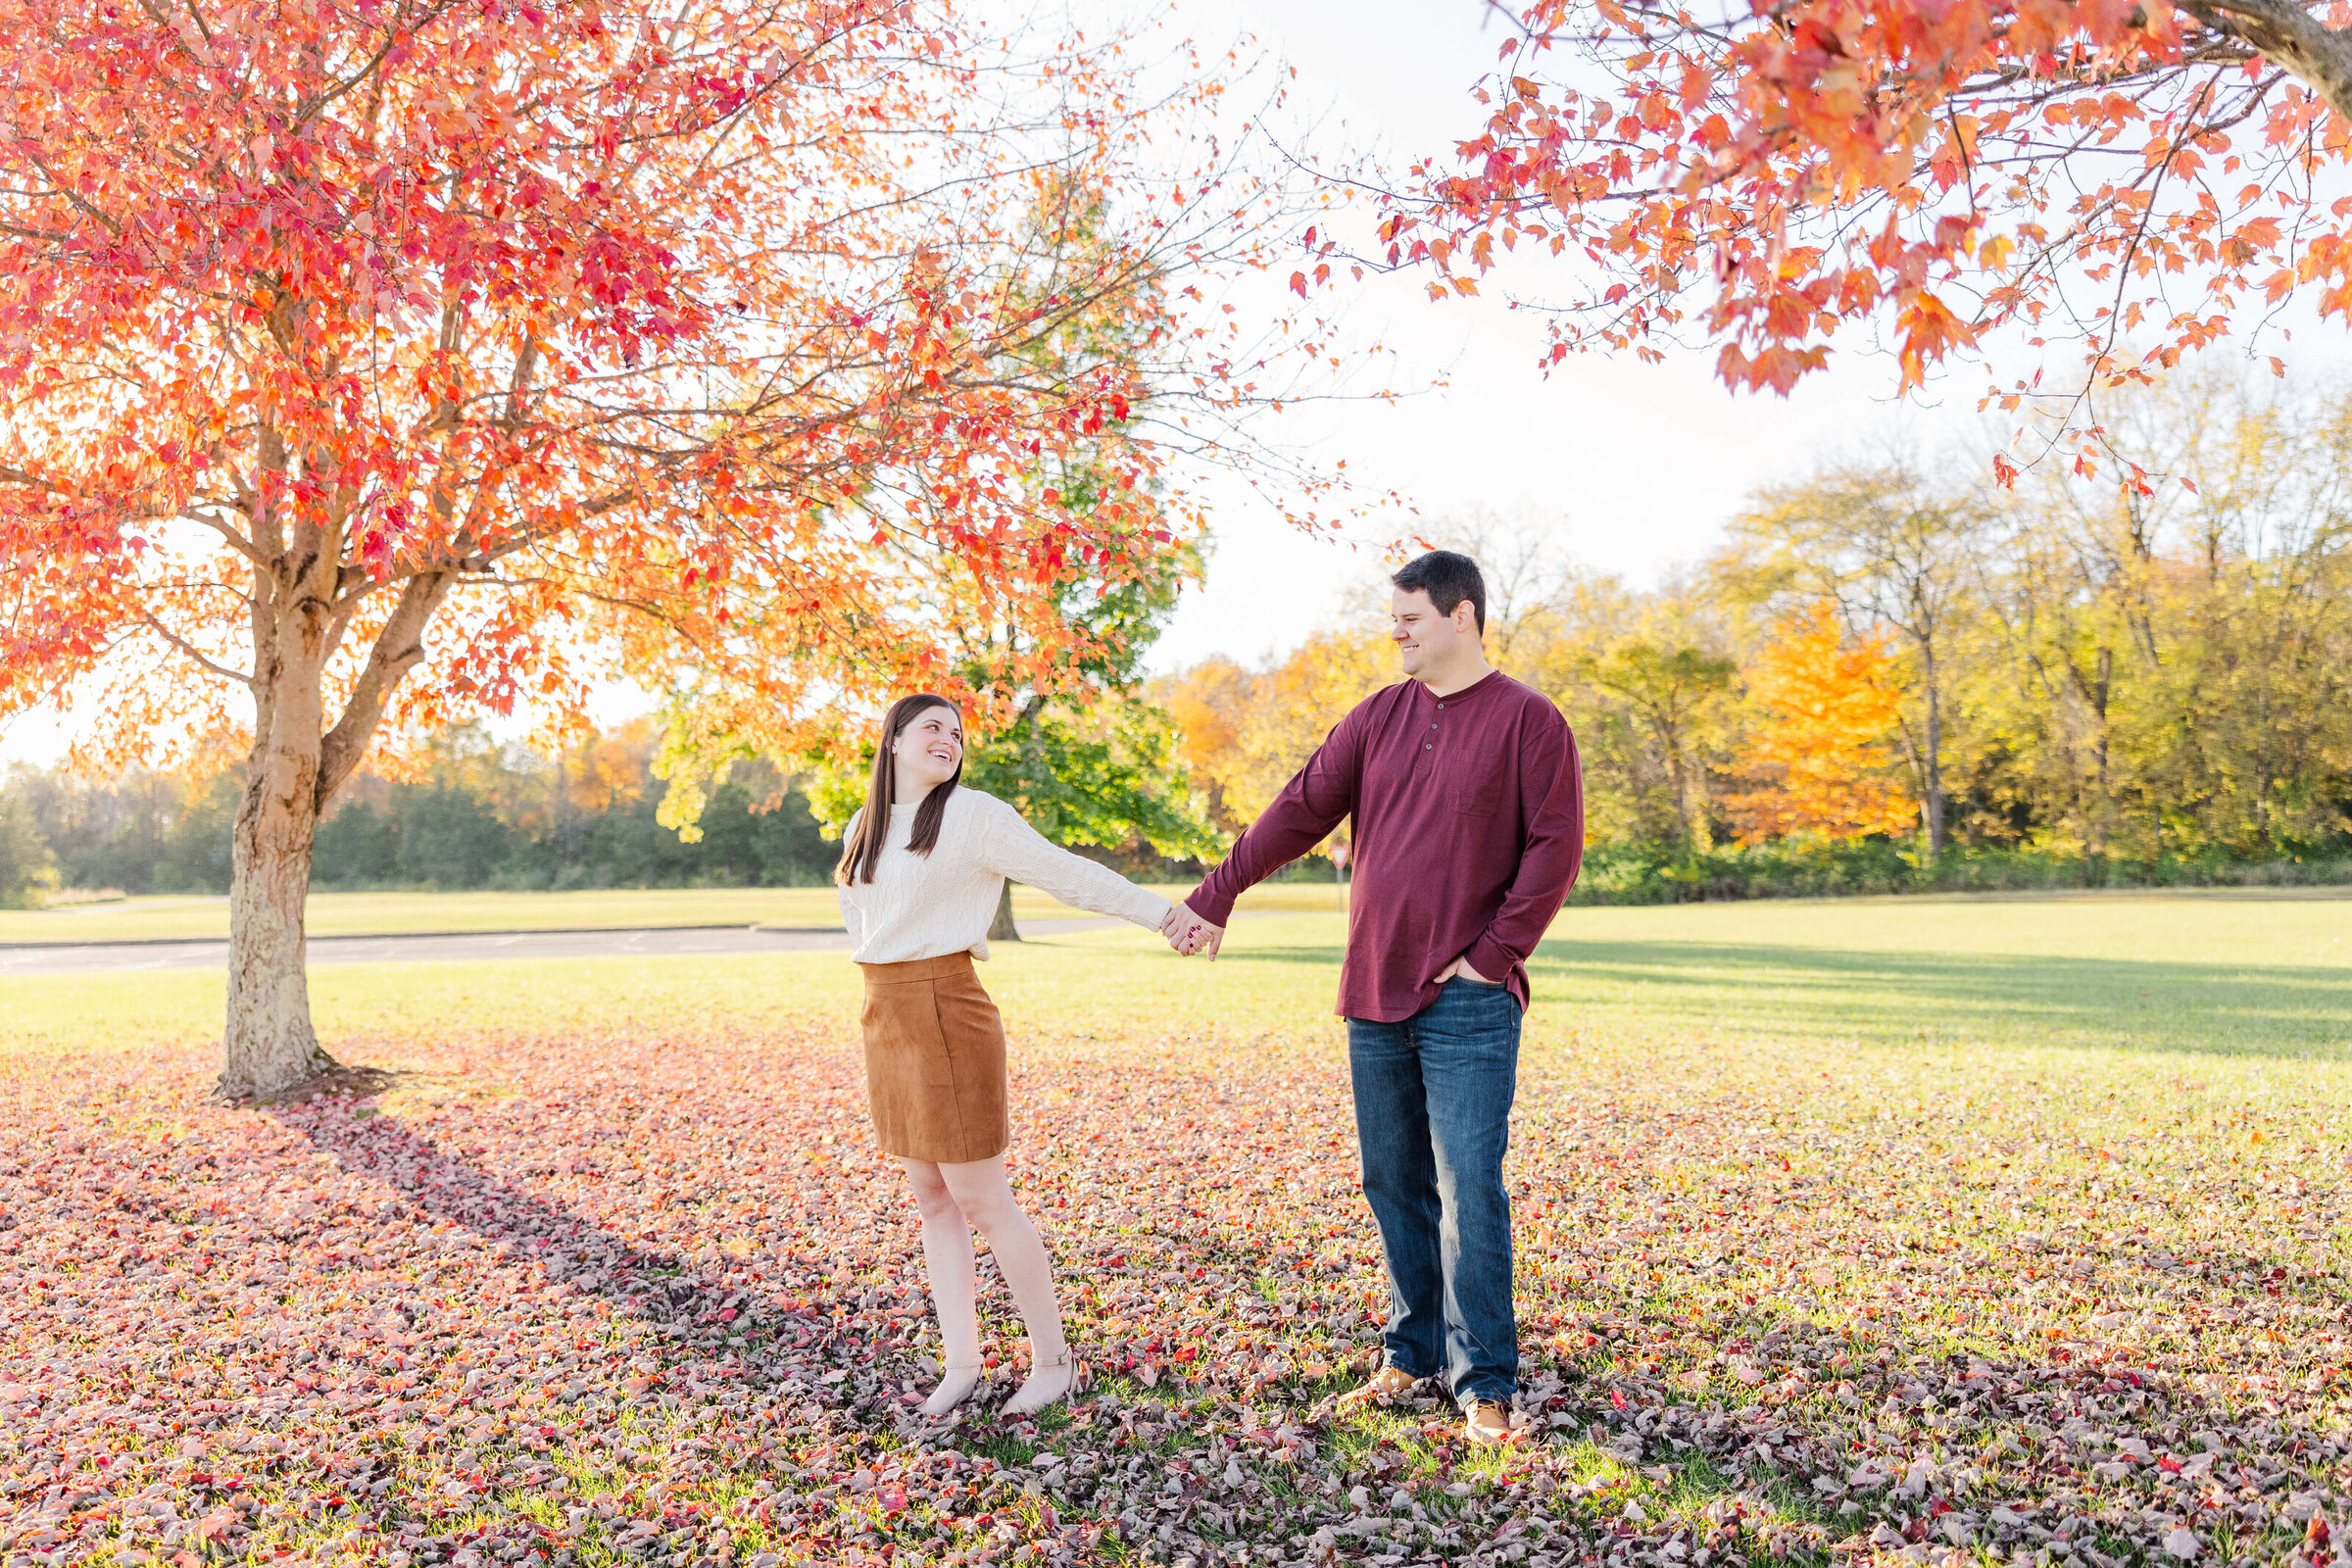 A woman holds a man's hand as they walk in a park. The trees are bright red because it's fall in Ohio. She is wearing a tan skirt with an ivory blouse and he is wearing blue jeans and a maroon shirt.